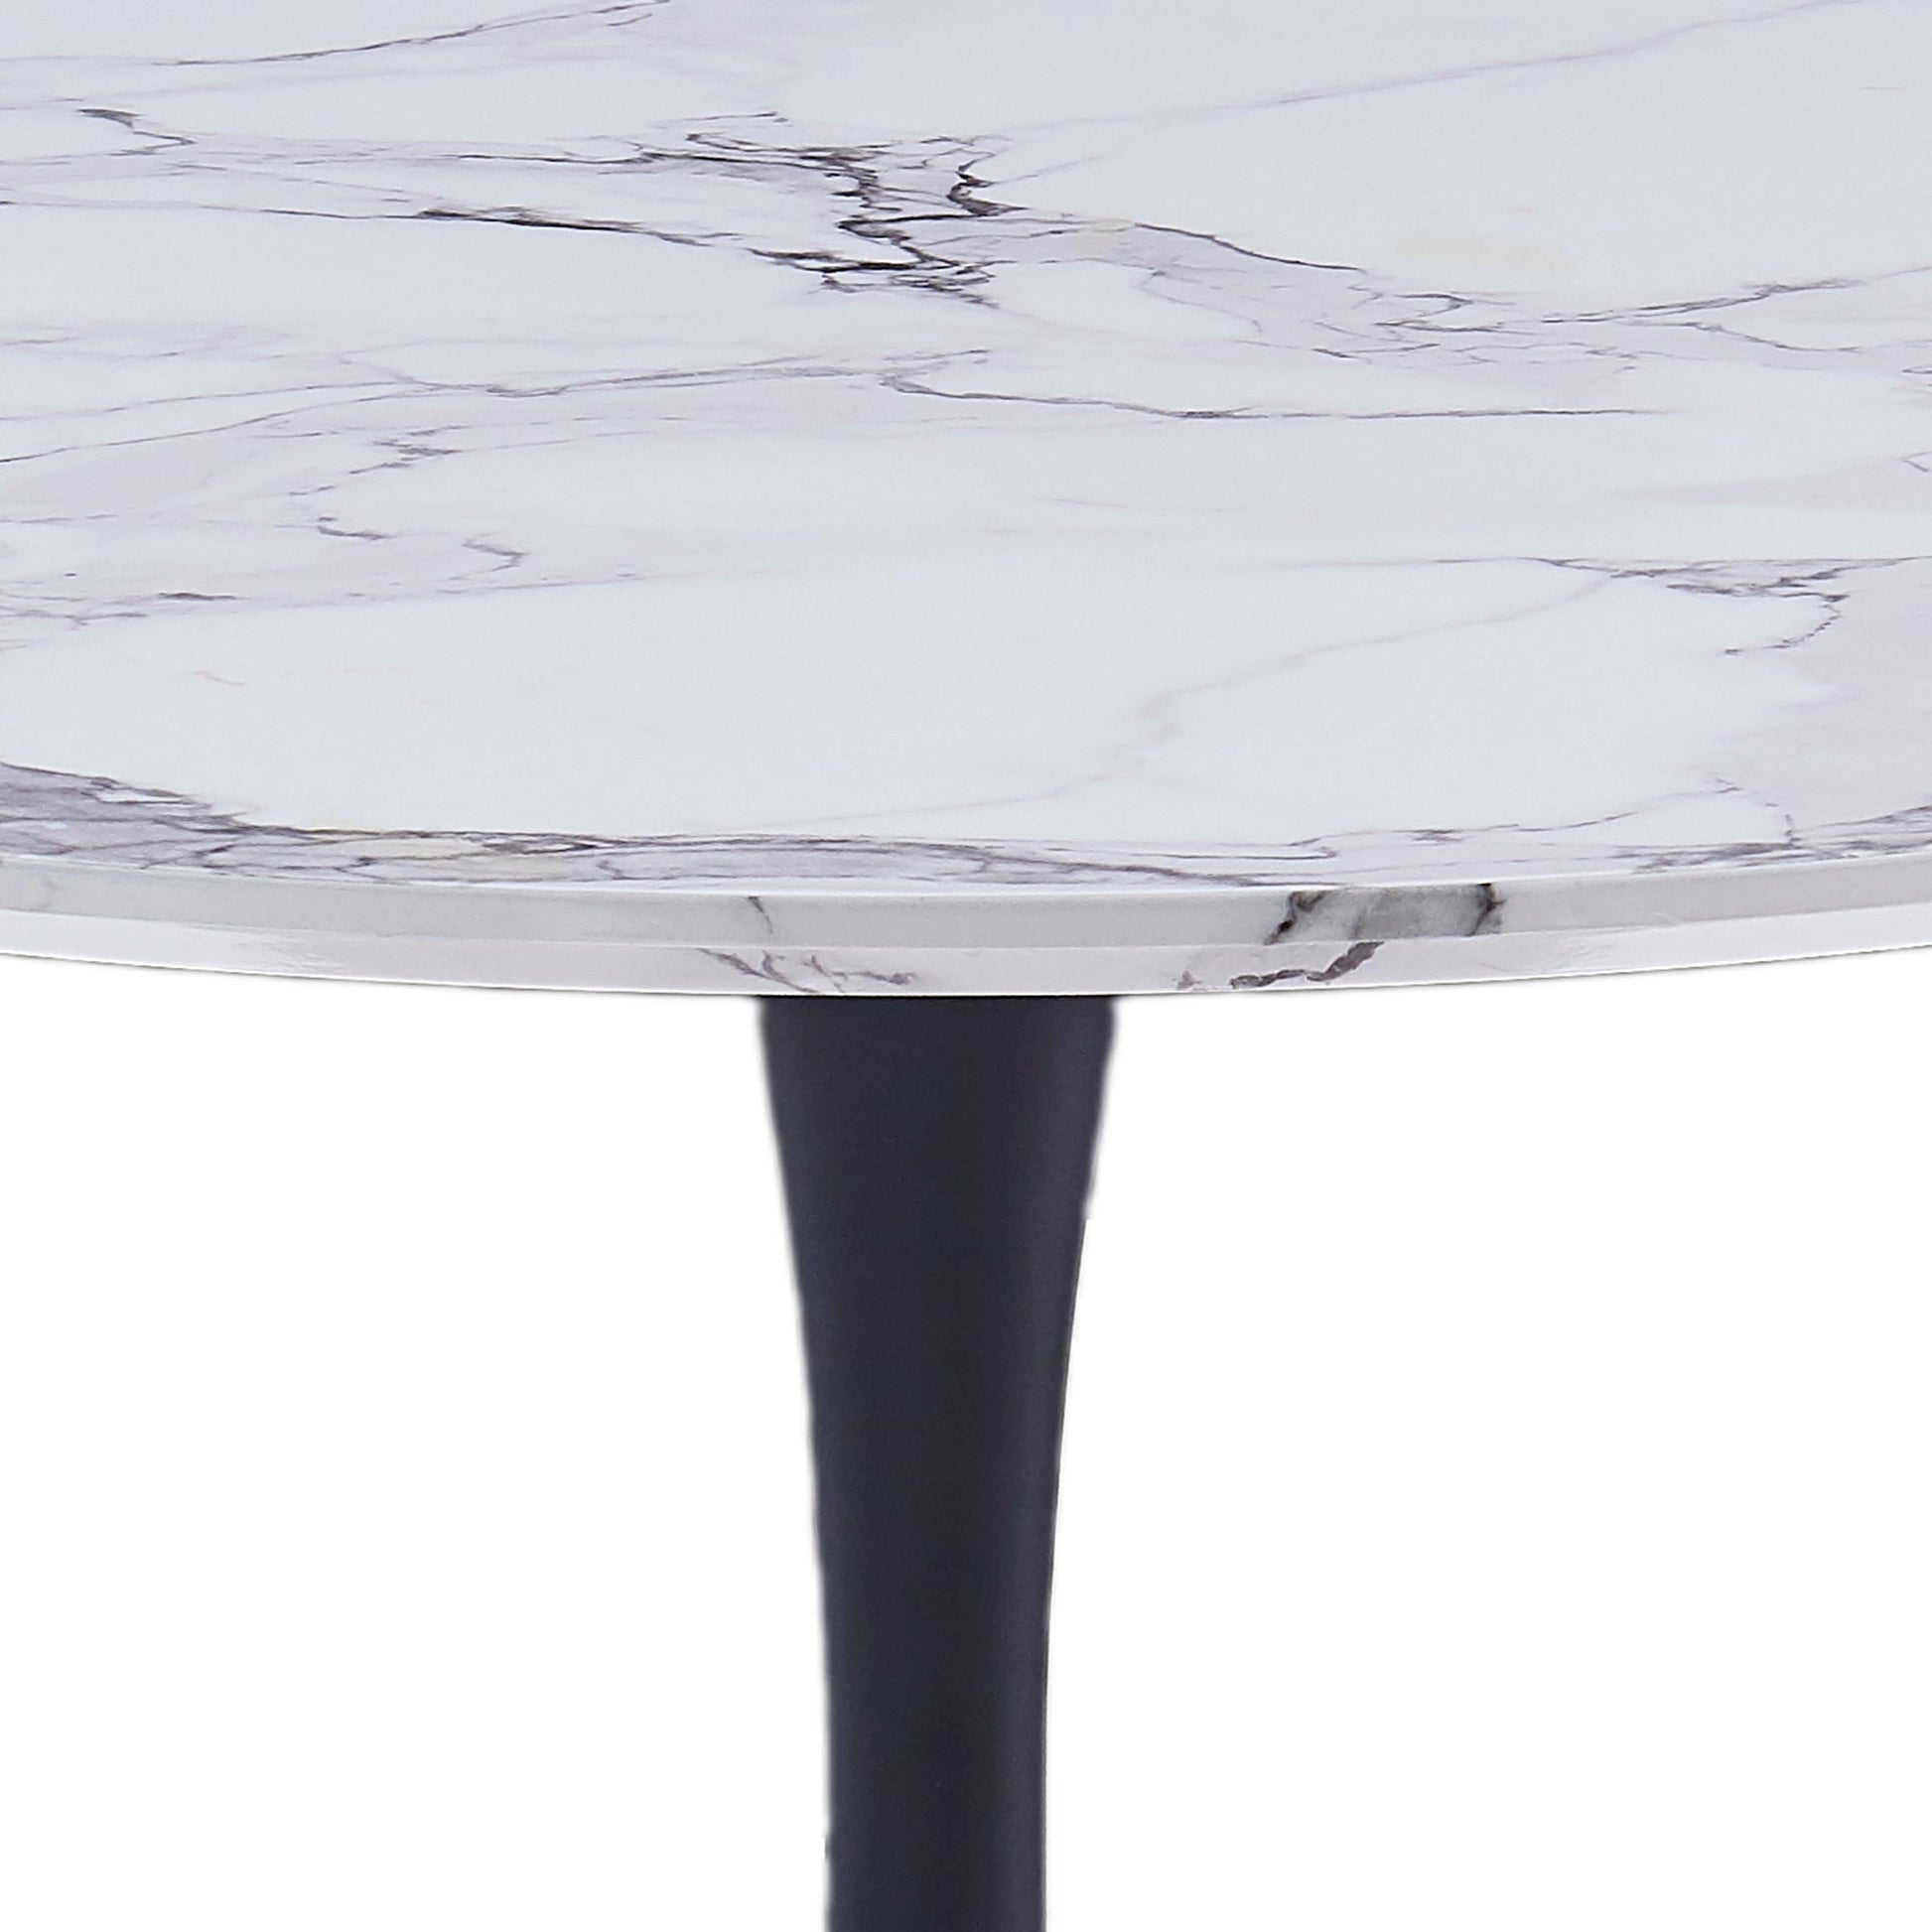 Round Dining Table Zilo 40" Faux Marble Top - Your Bar Stools Canada